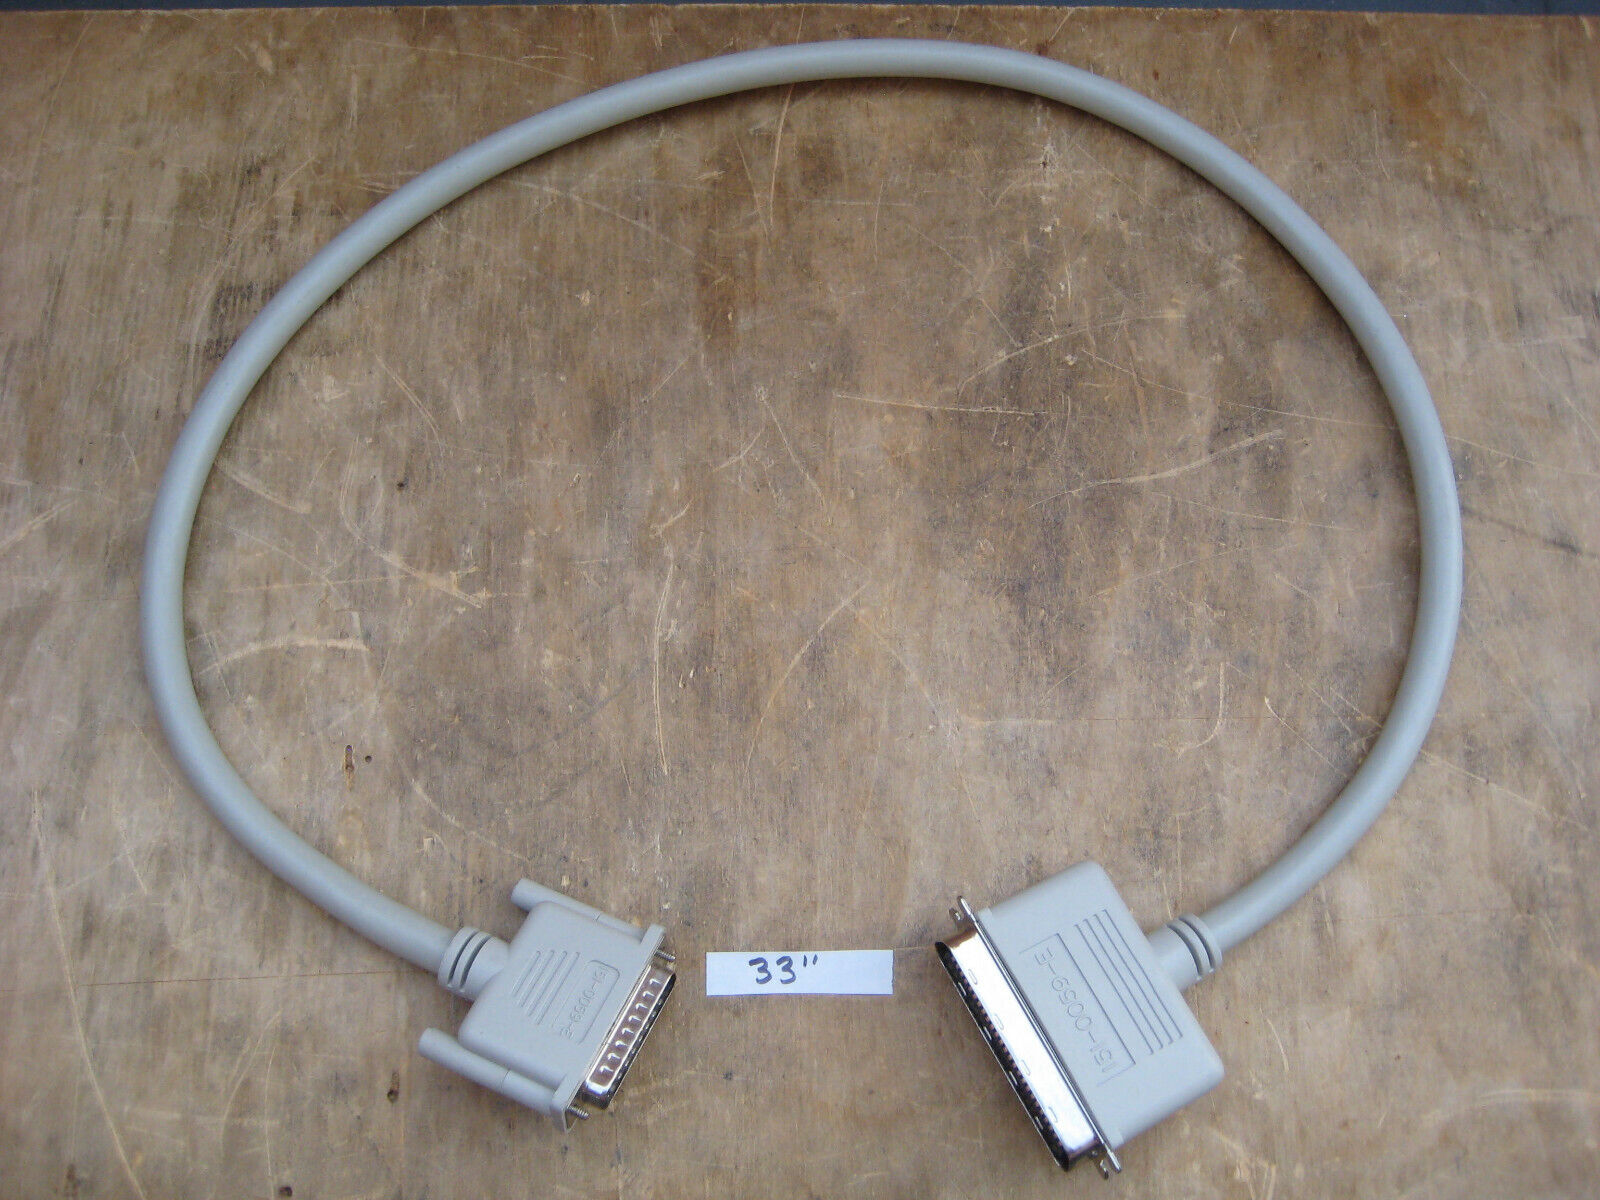 VERY HIGH QUALITY 25-pin DB-25-Centronics 50-pin Akai MPC60 SCSI Ext. Cable 33\